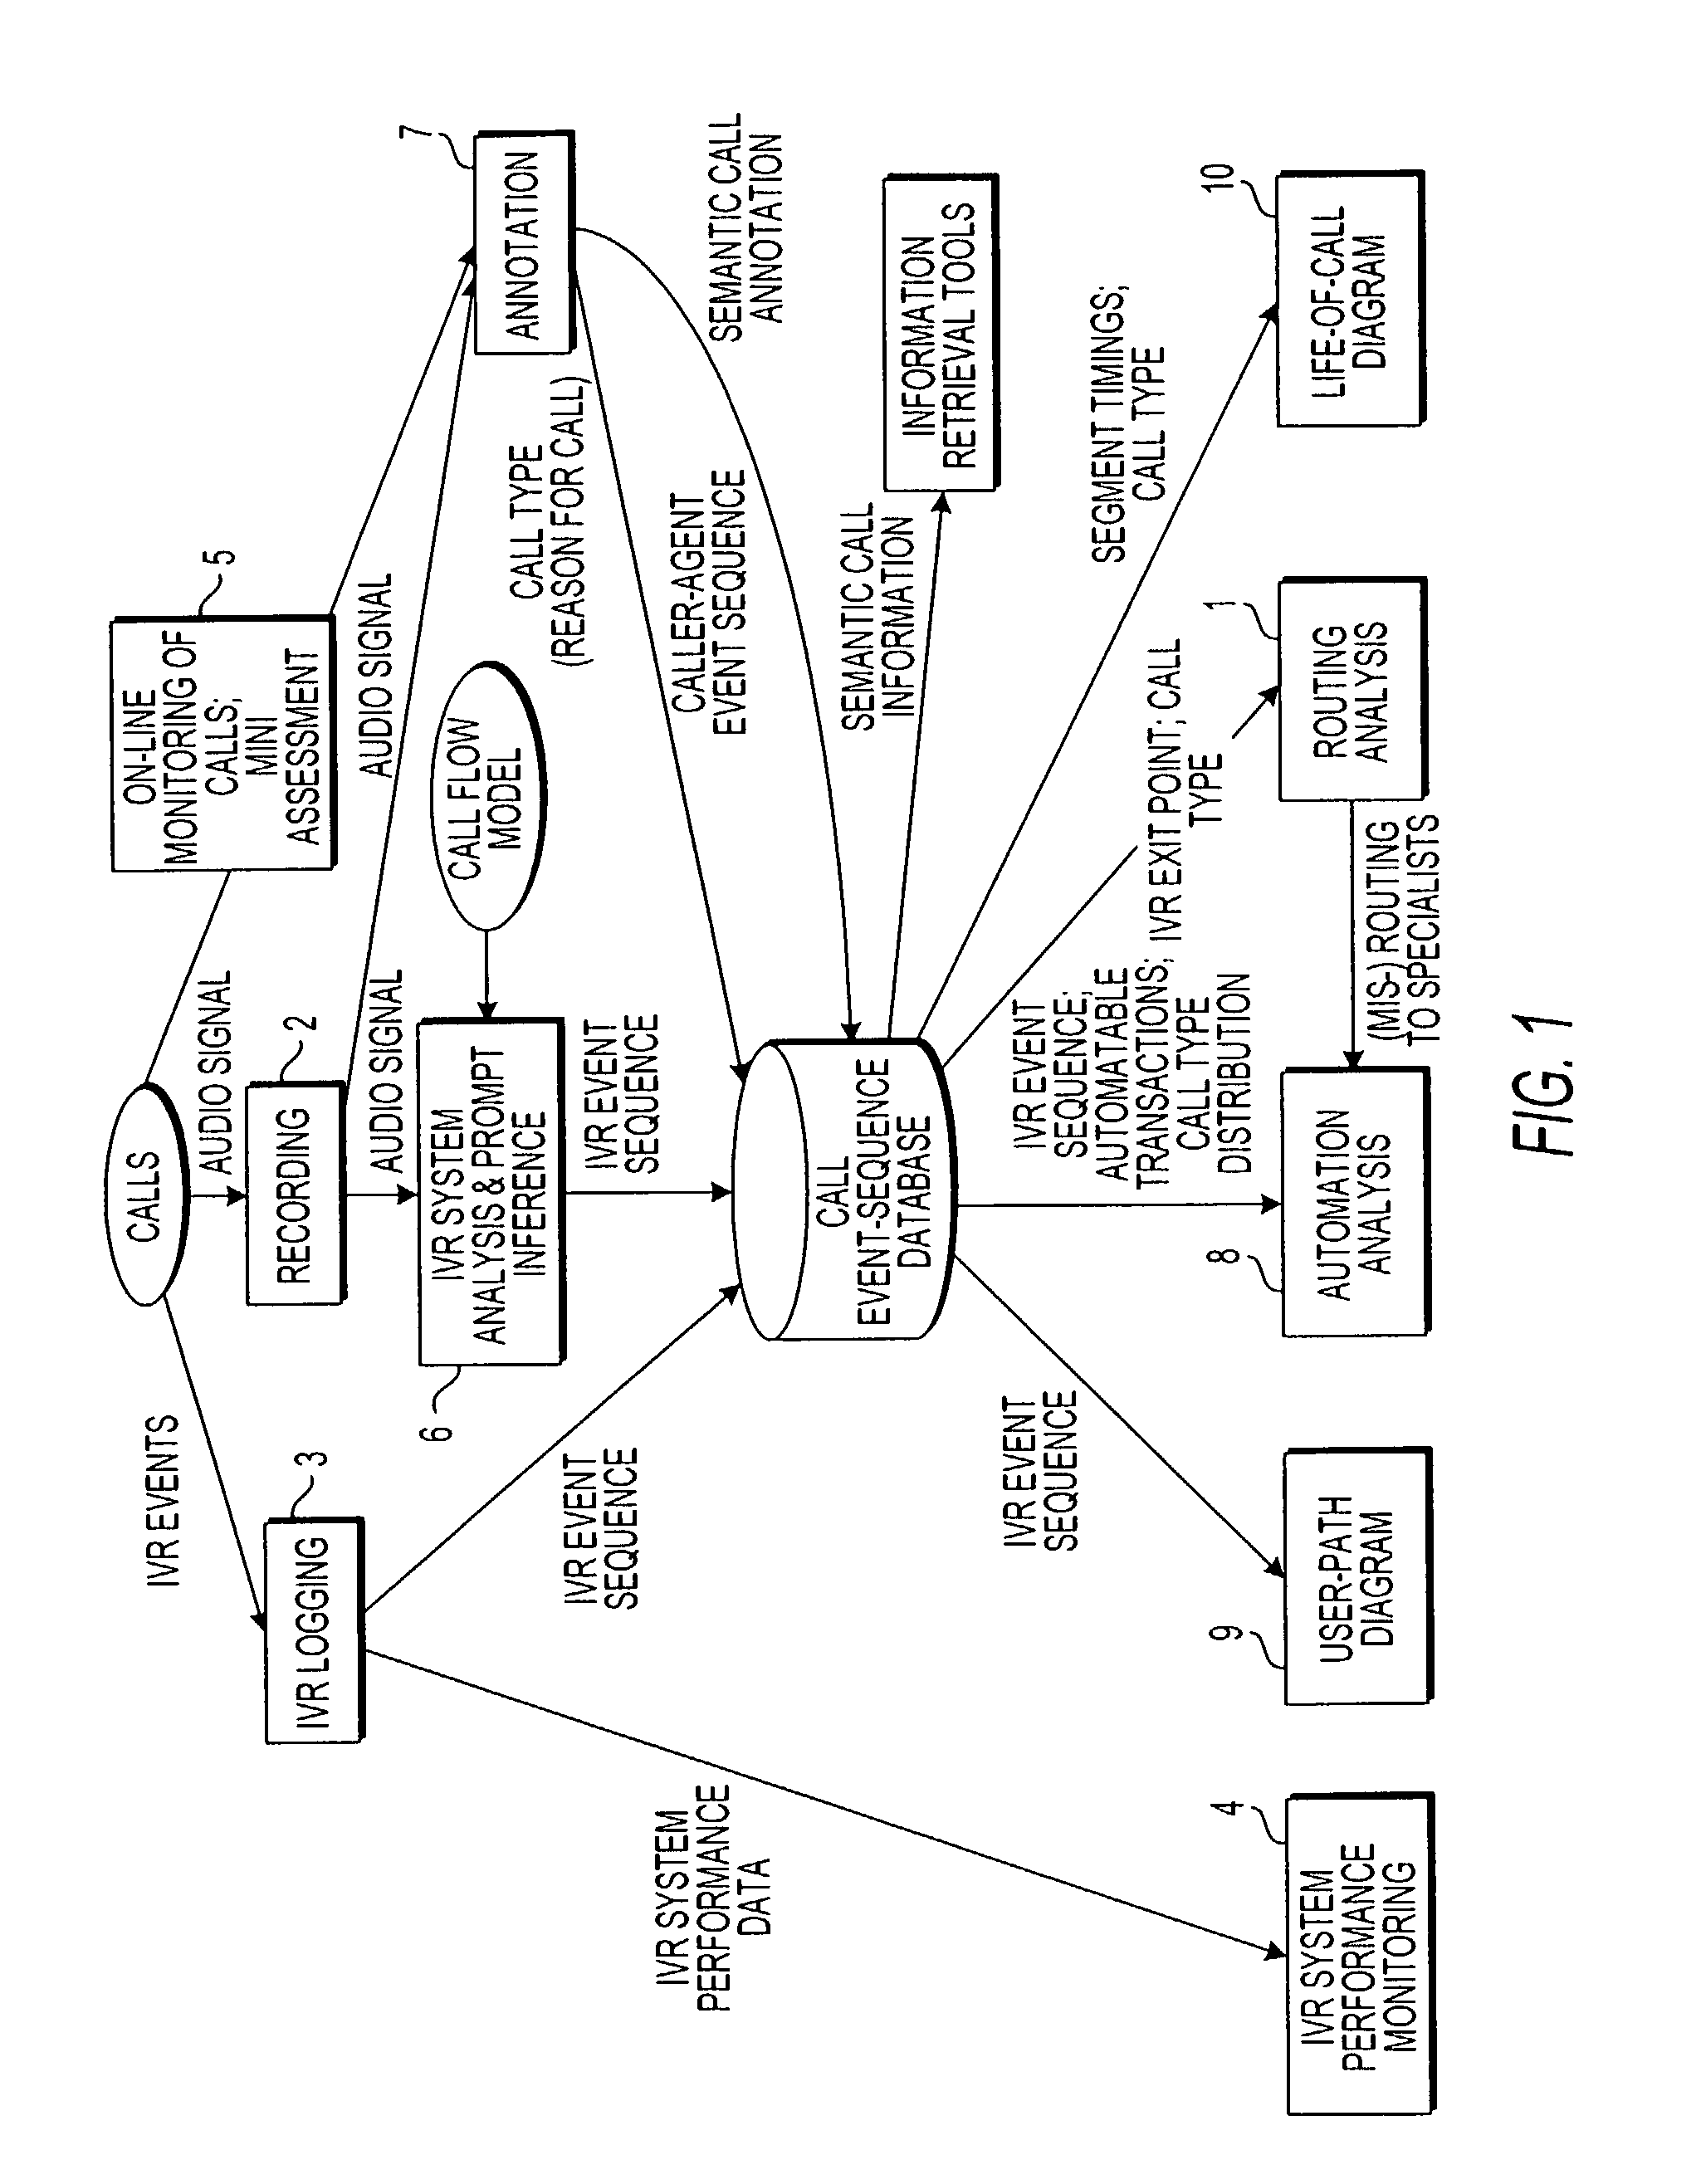 Apparatus and method for visually representing behavior of a user of an automated response system